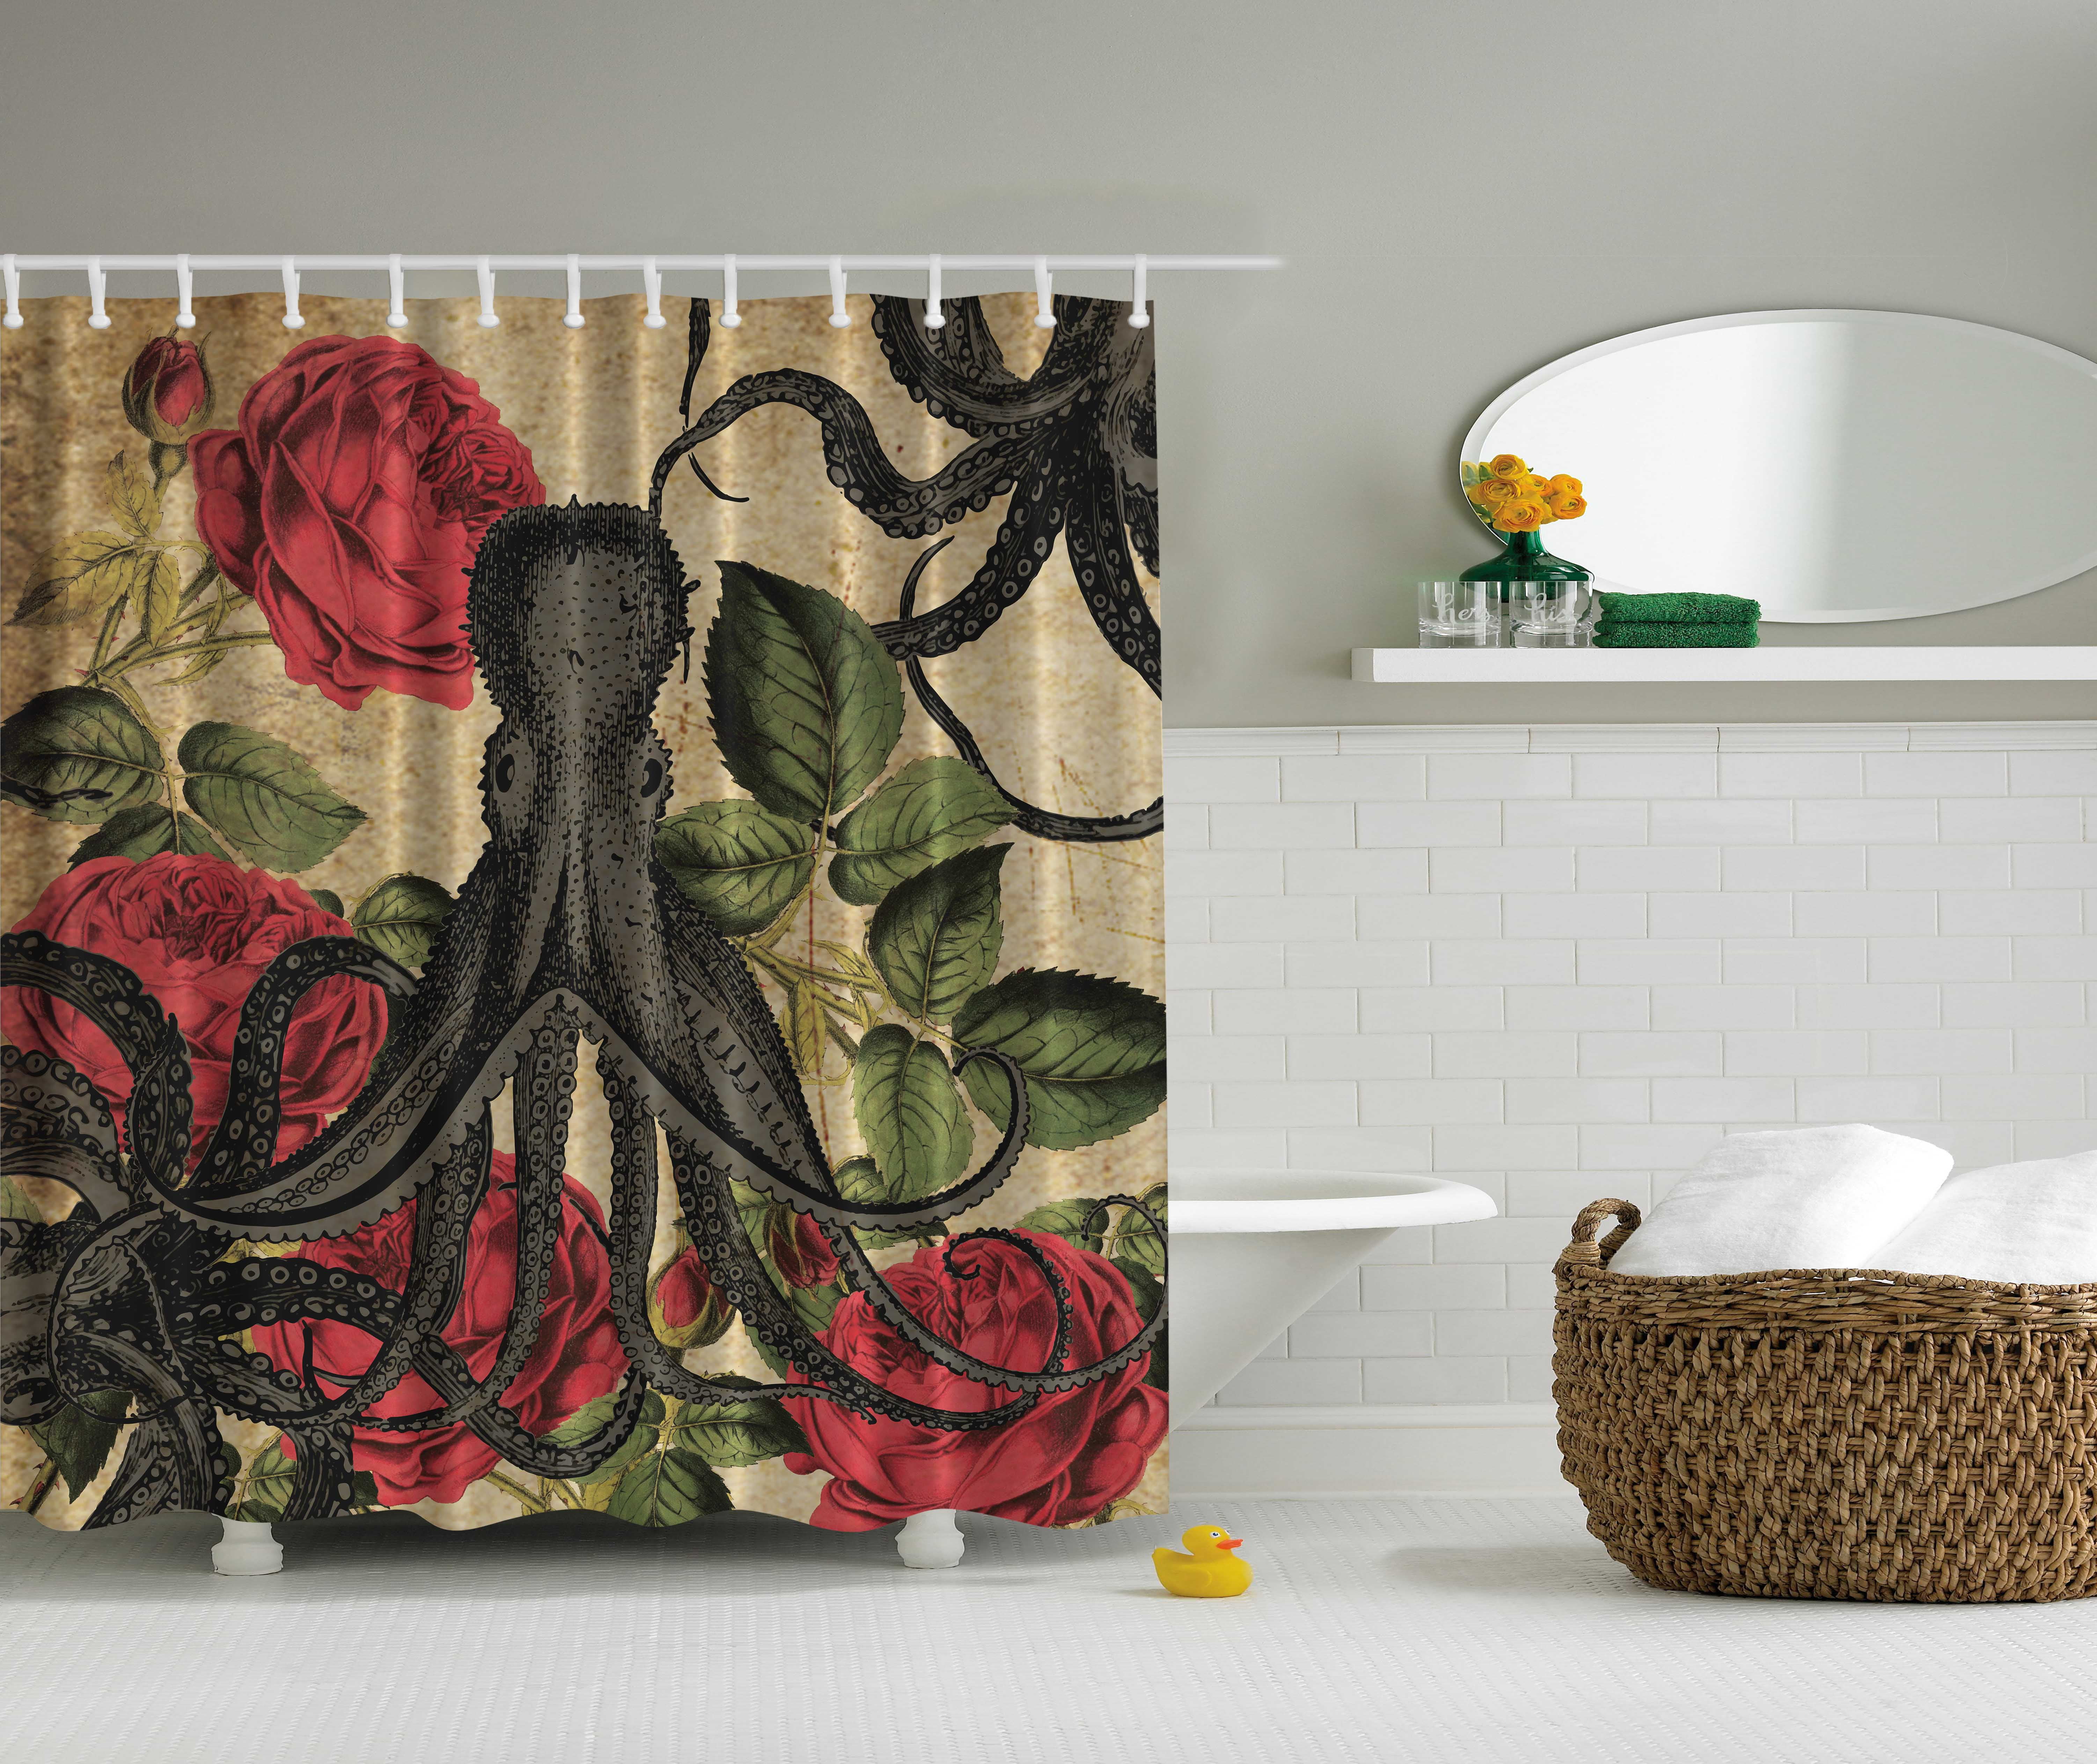 Scary Octopus Waterproof Polyester Bathroom Shower Curtain With Free 12 Hooks 